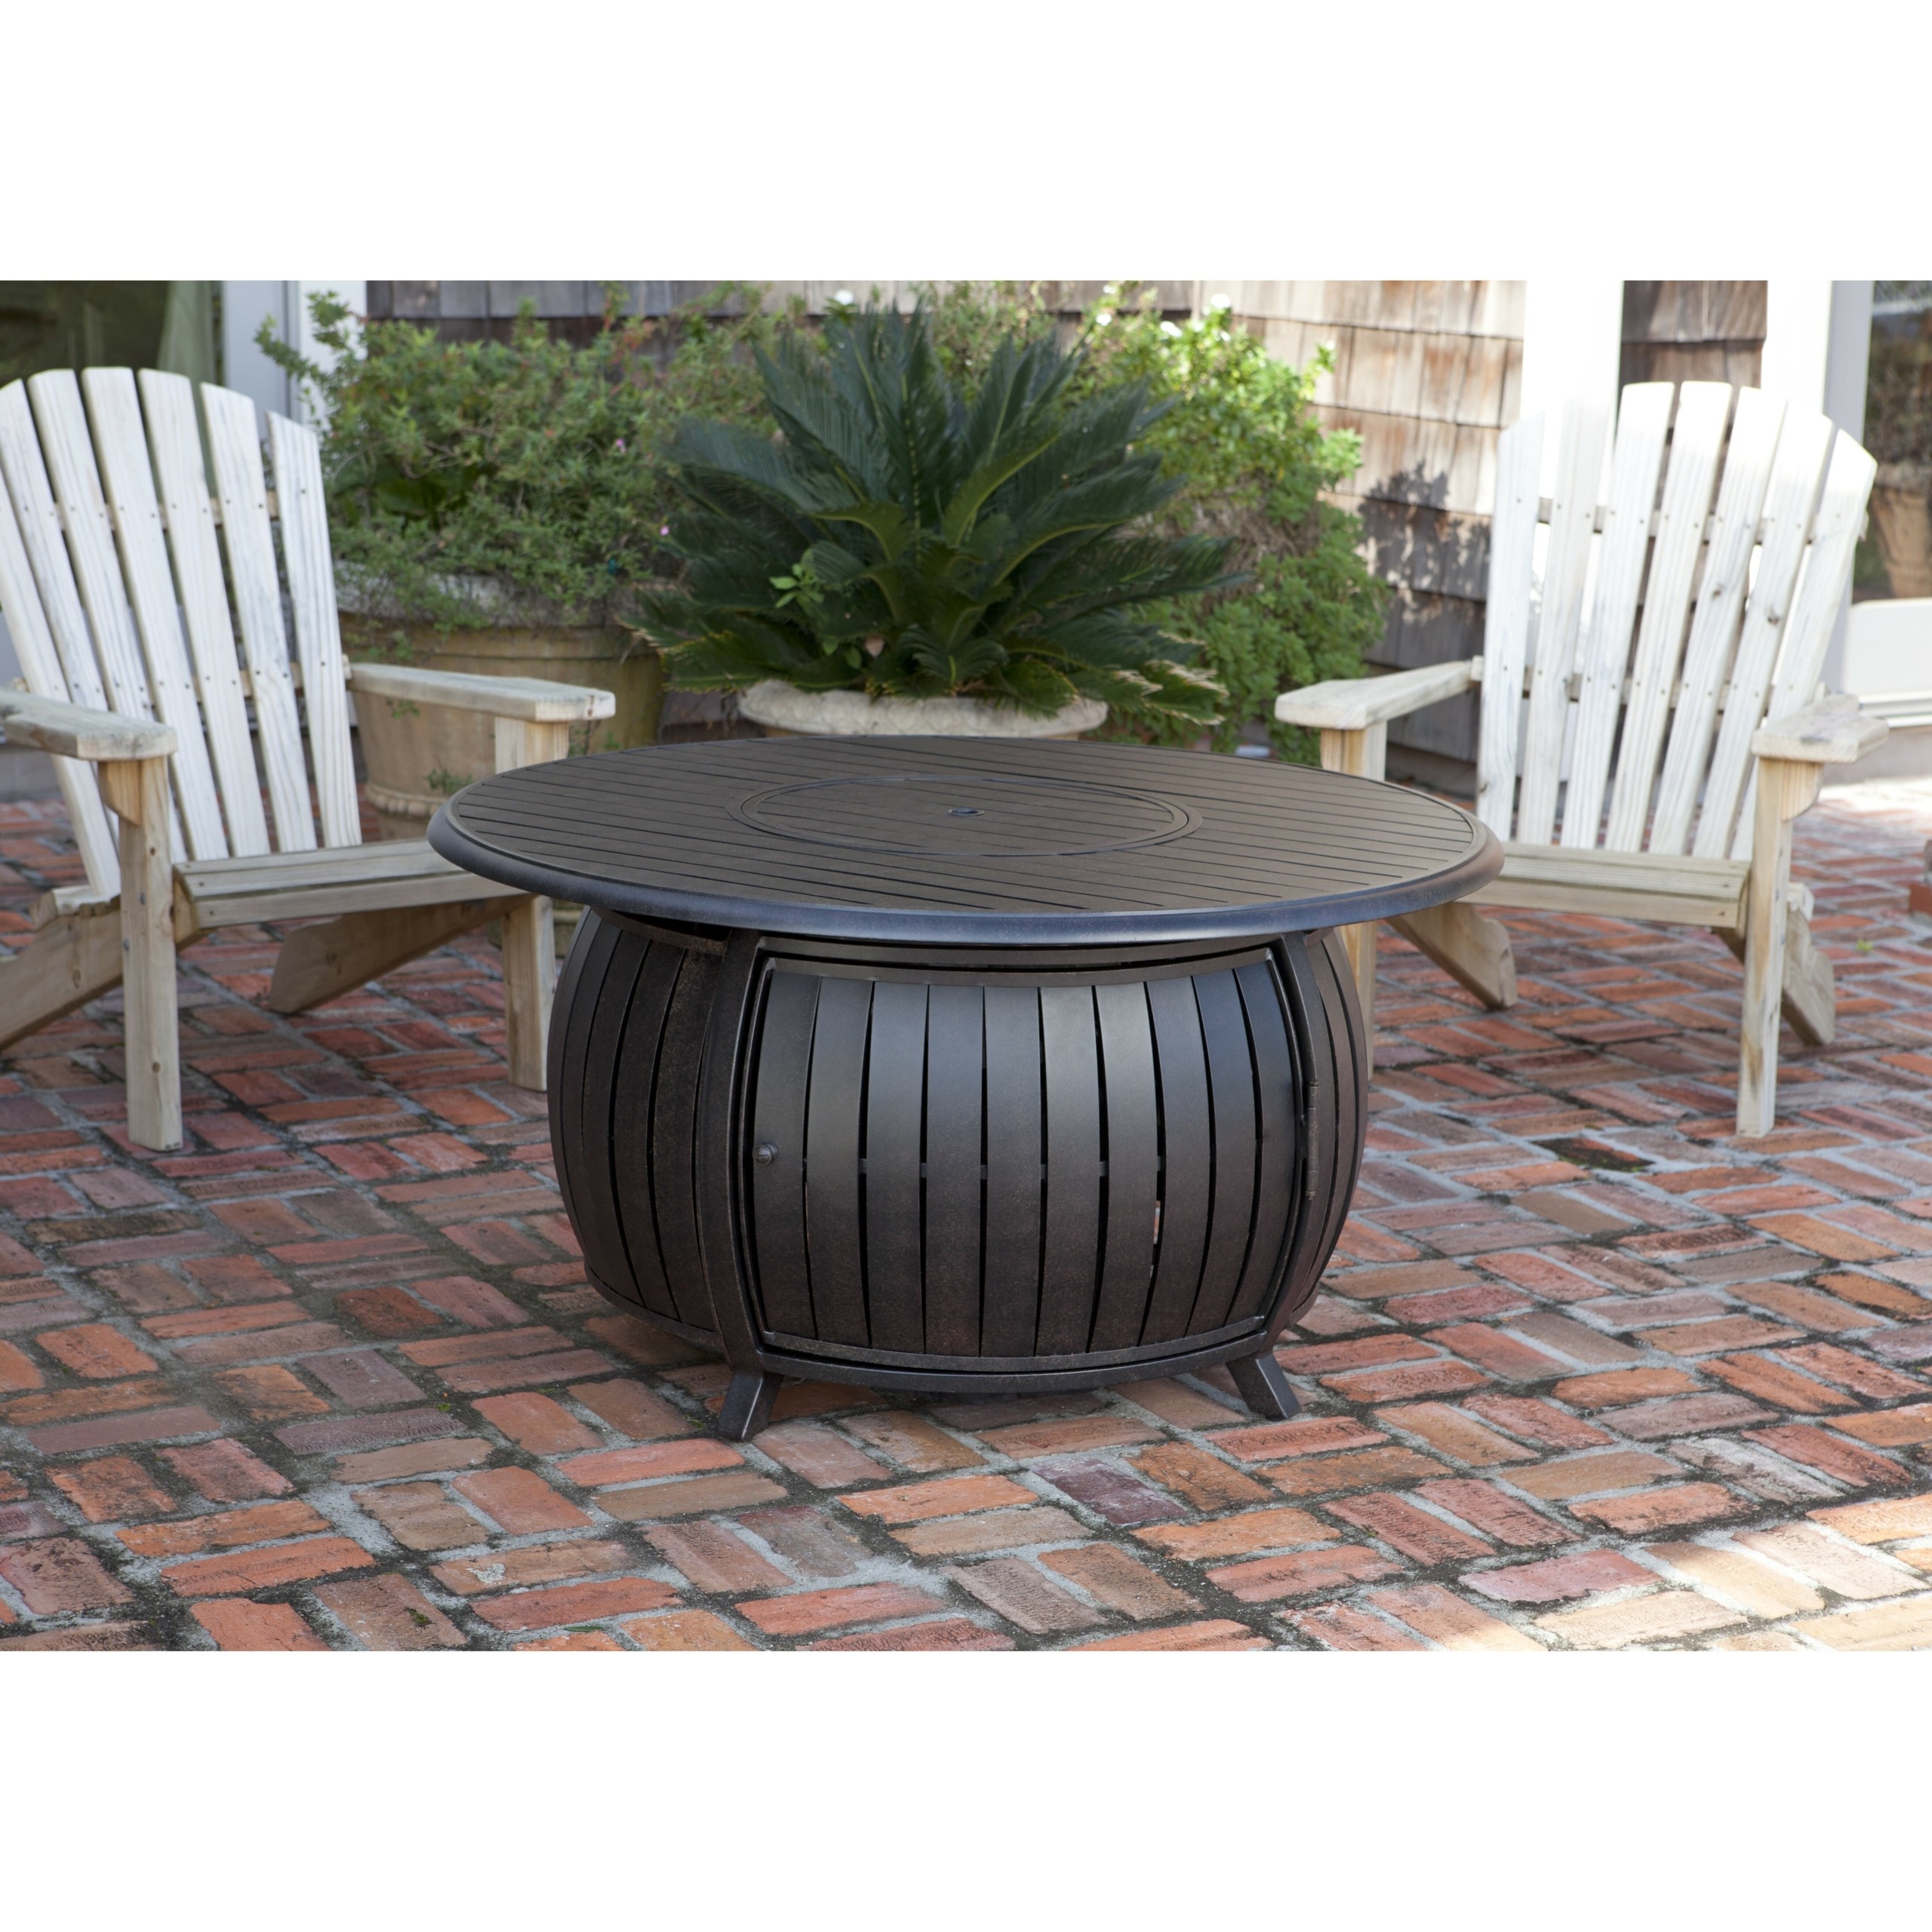 Fire pit table with lid 4